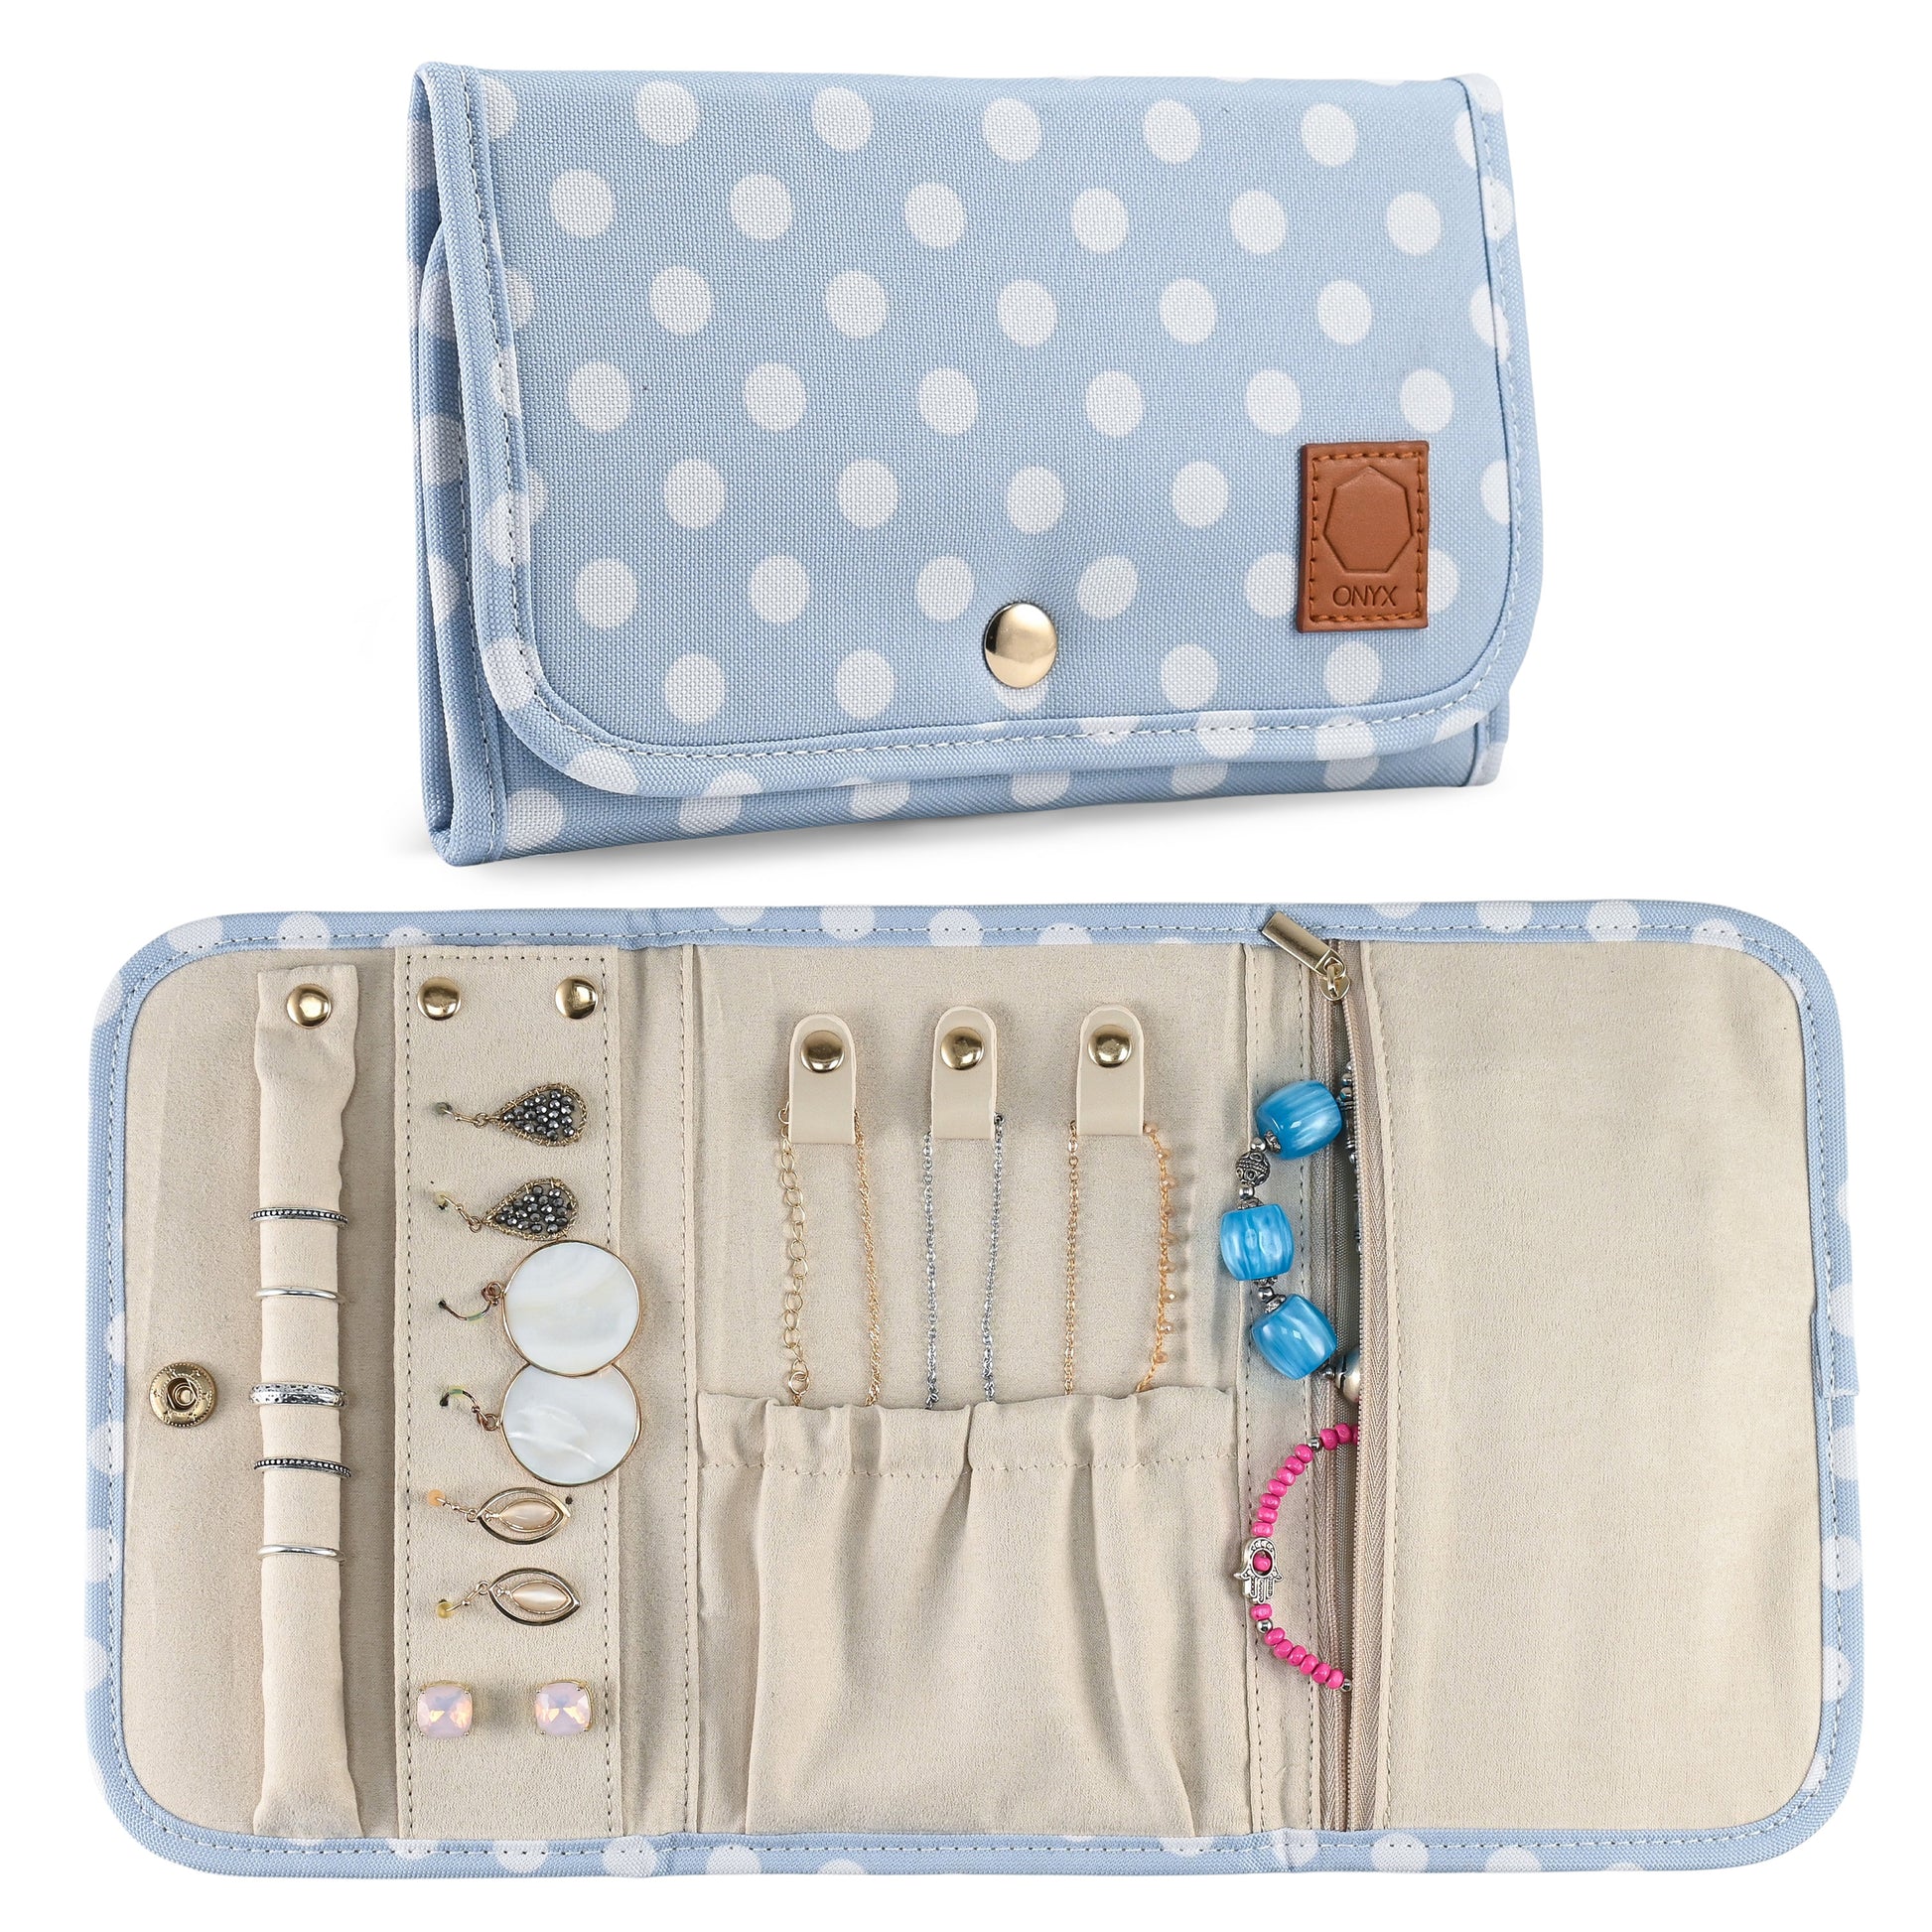 Travel Jewelry Organizer Case - Foldable for Necklaces, Bracelets, Ear